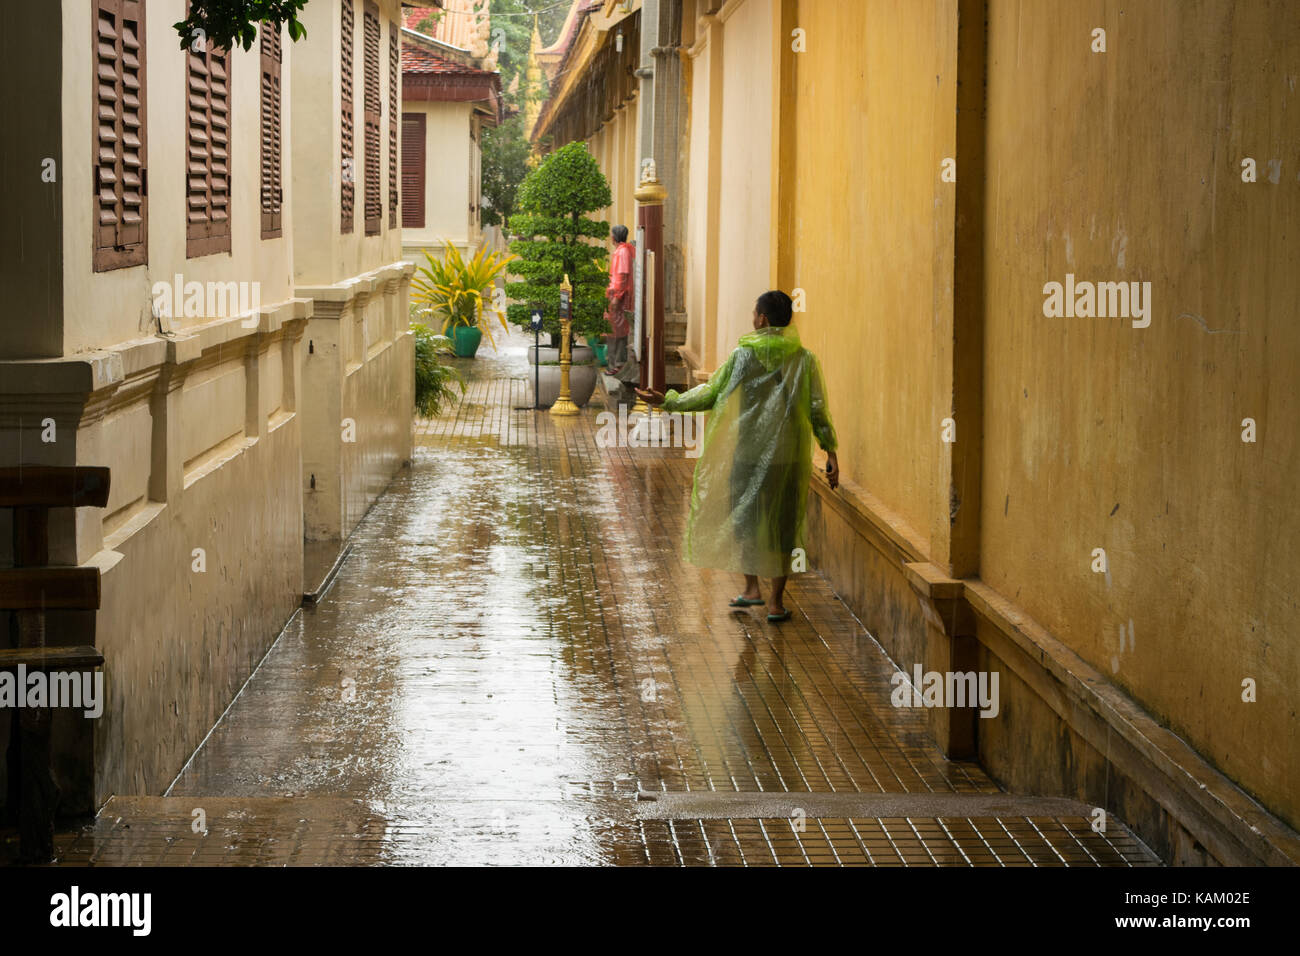 A teenager wearing a transparent green rain jacket, checking if the  the heavy monsoon rain stopped, after a heavy shower in Phnom Penh city, Cambodia Stock Photo